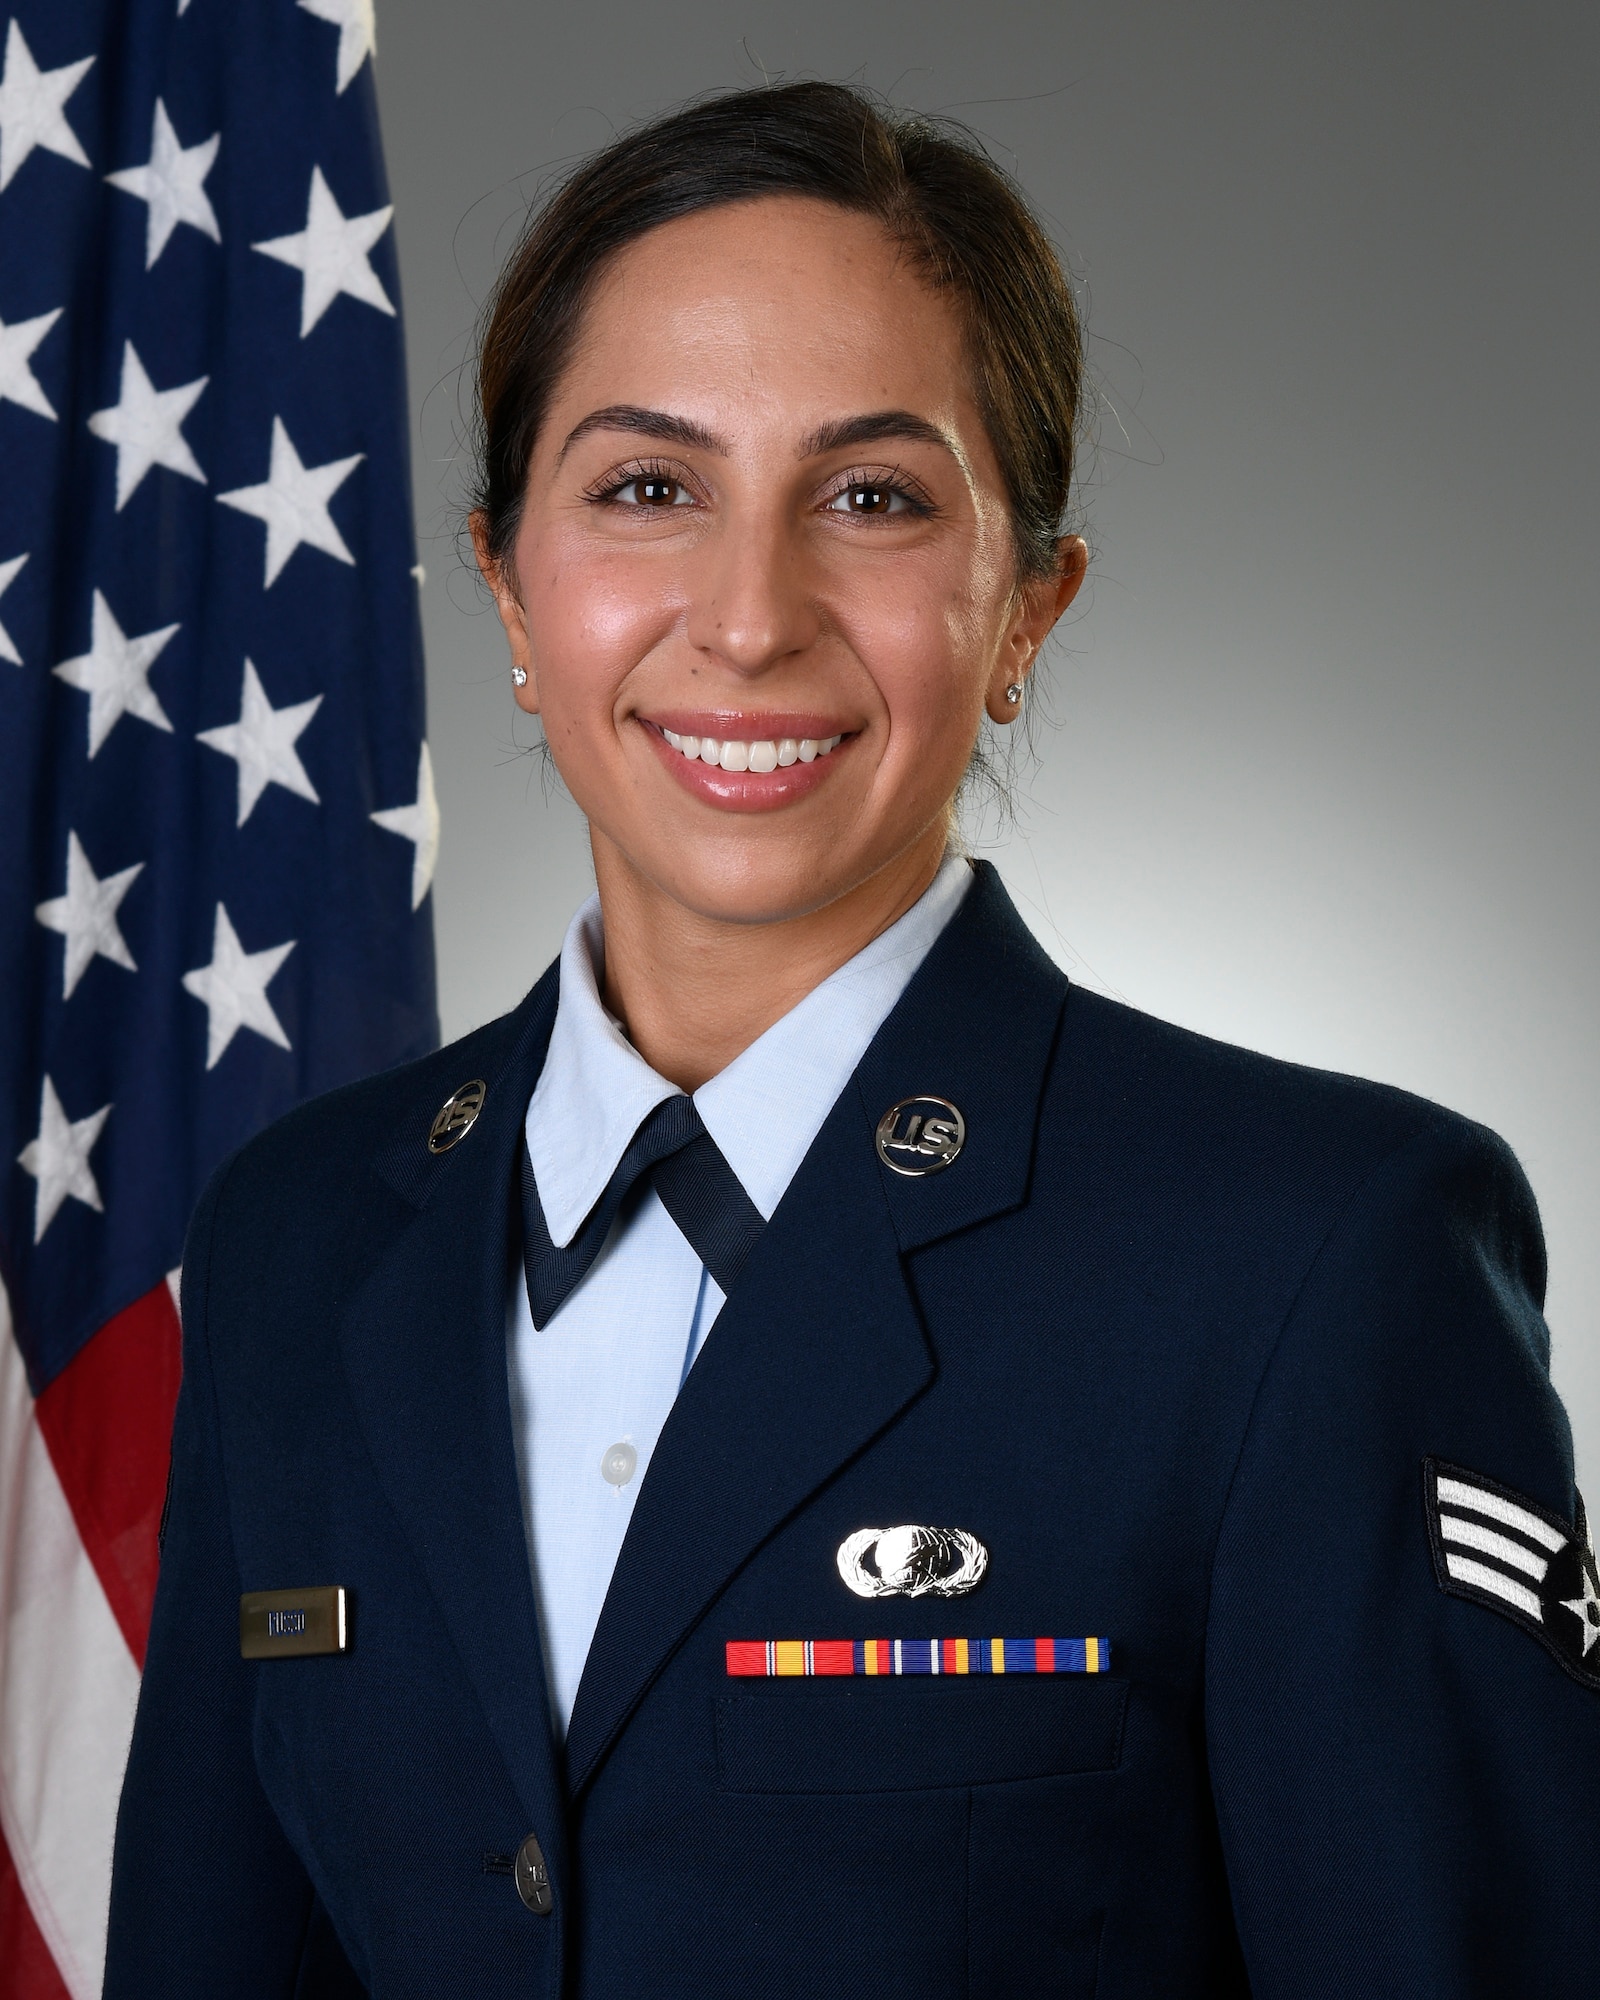 Senior Airman Christina Russo, a public affairs specialist with the 910th Airlift Wing, poses for her official photo on Aug. 13, 2019, at Youngstown Air Reserve Station. Russo is the daughter of Carmen and Anna Marie Russo, both of which served in the Air Force Reserve as a loadmaster and administrative assistant.